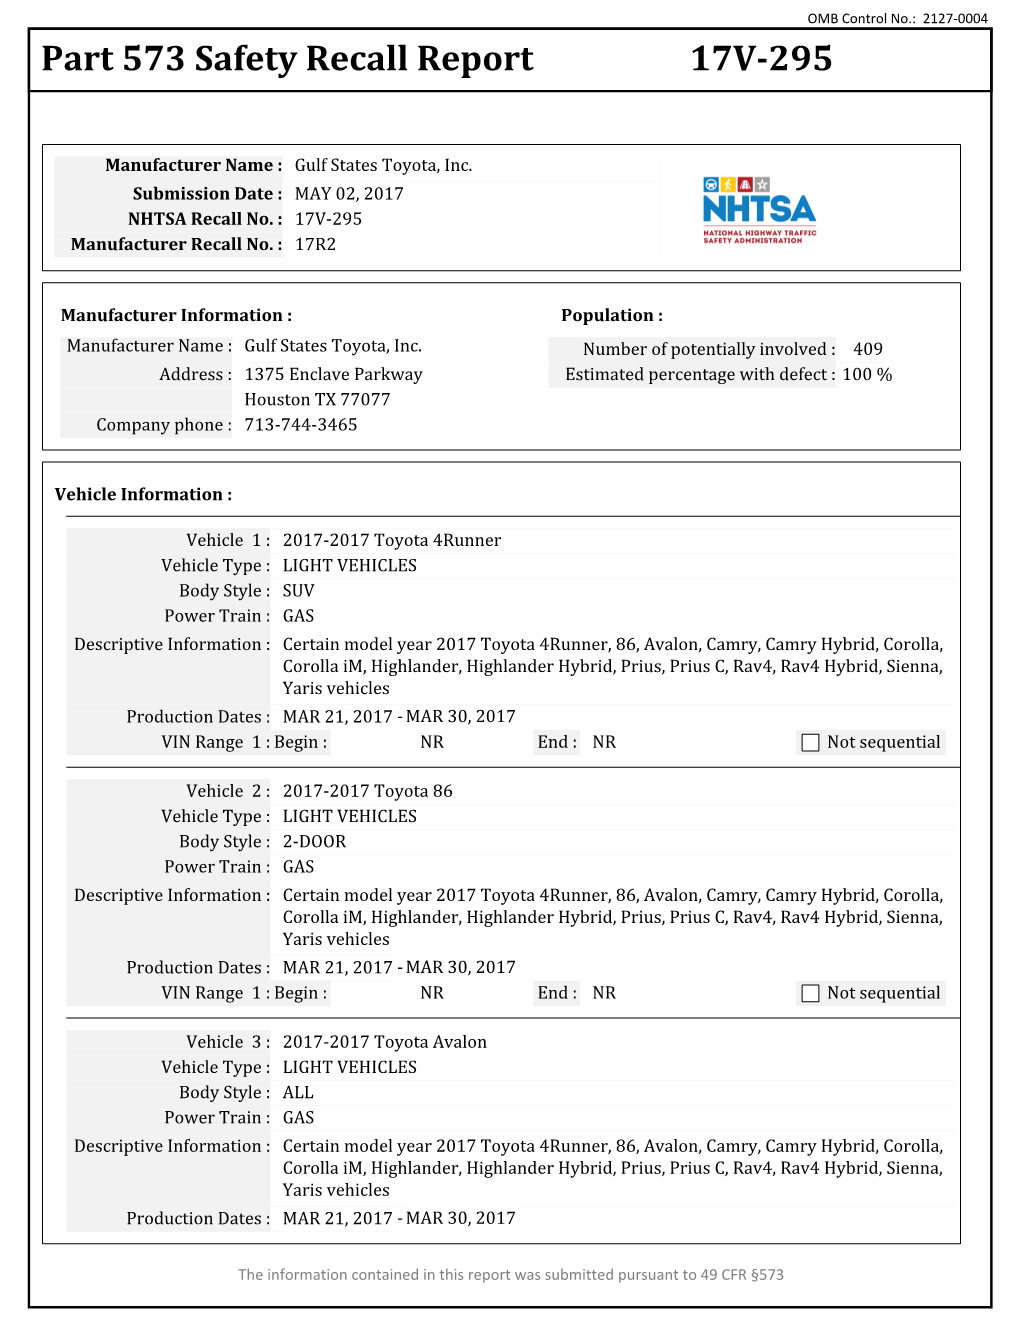 Part 573 Safety Recall Report 17V-295